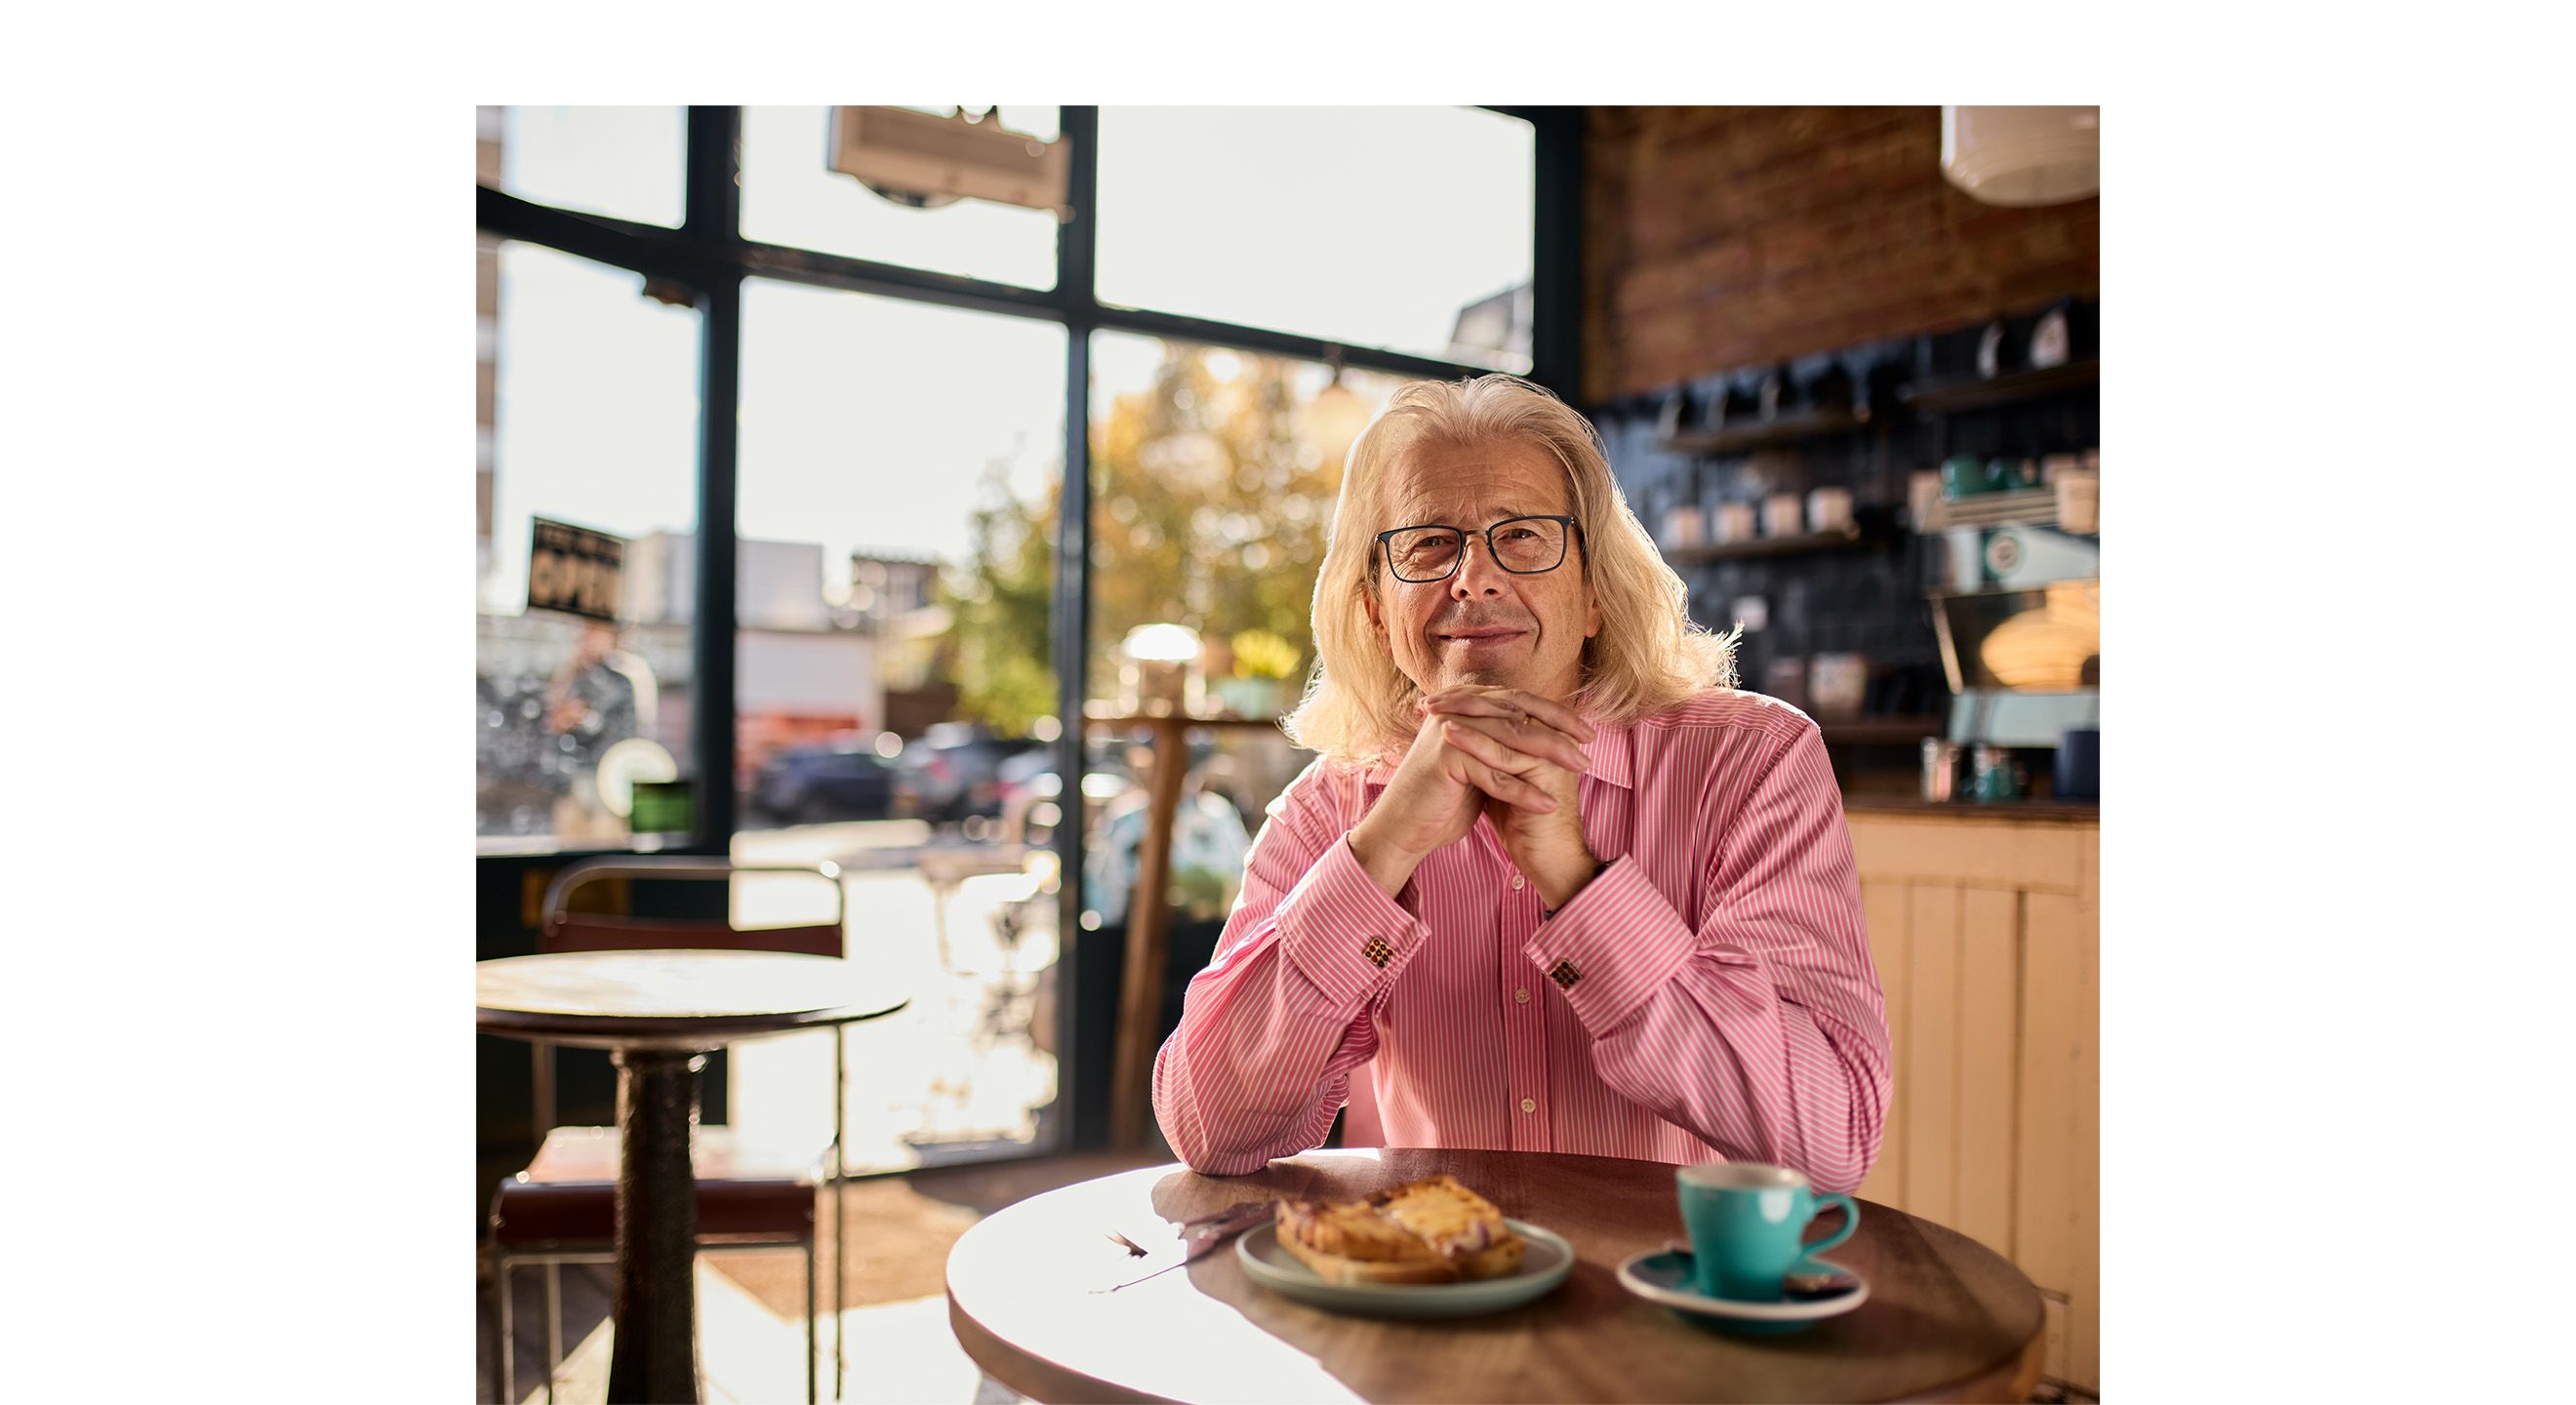 A blonde man wearing glasses and a red shirt sits in a cafe with a coffee and sandwich, looking to camera